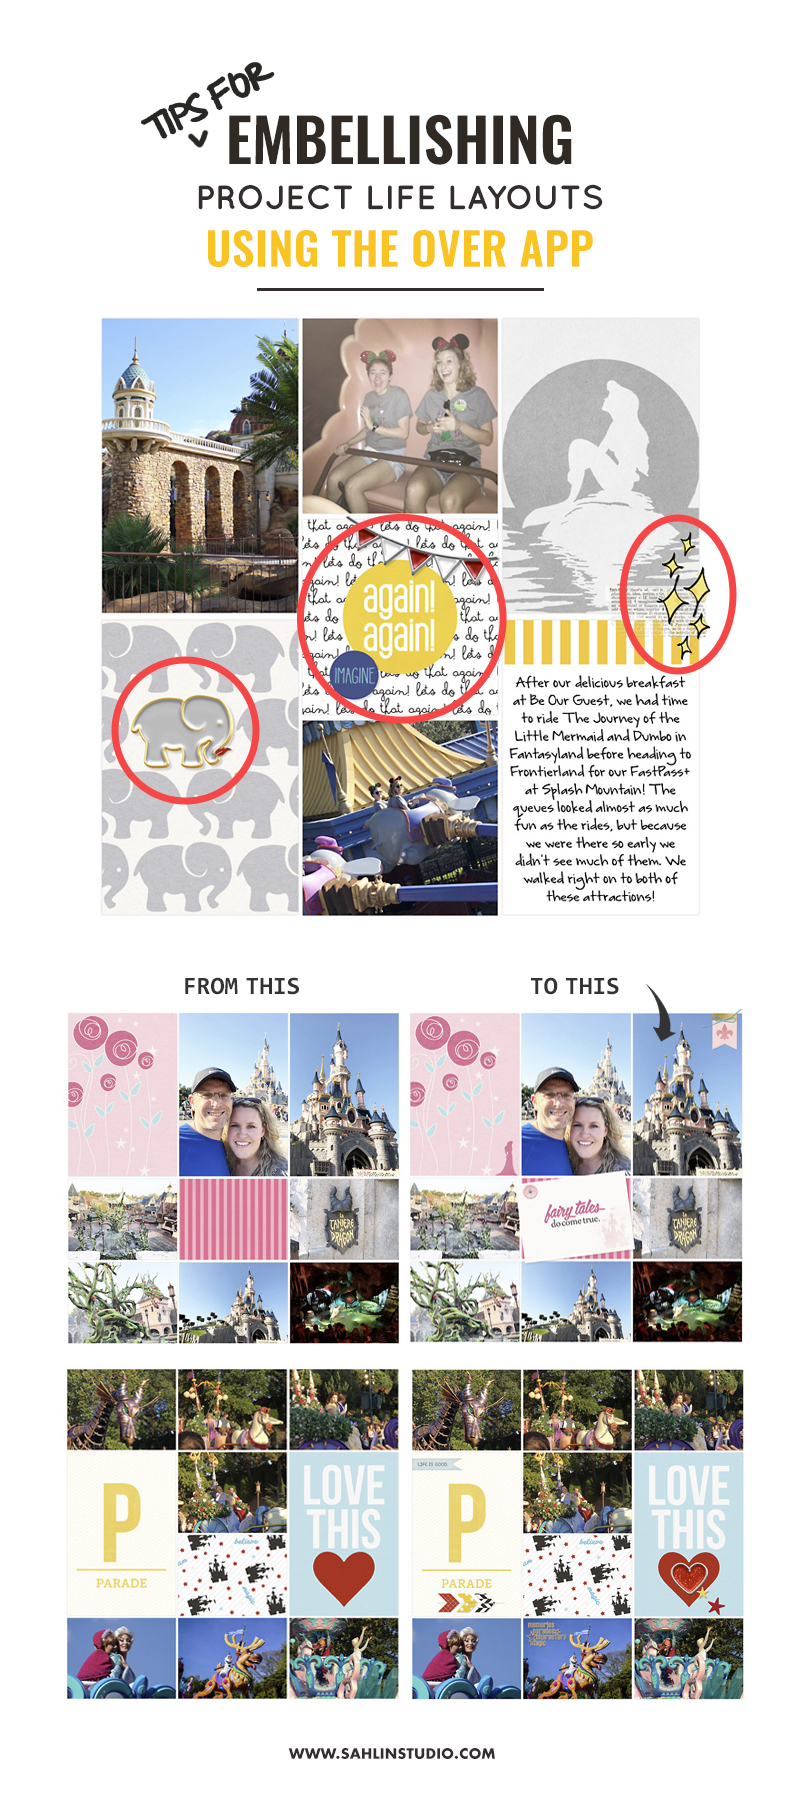 Tips For Embellishing Project Life Layouts Using the Over App